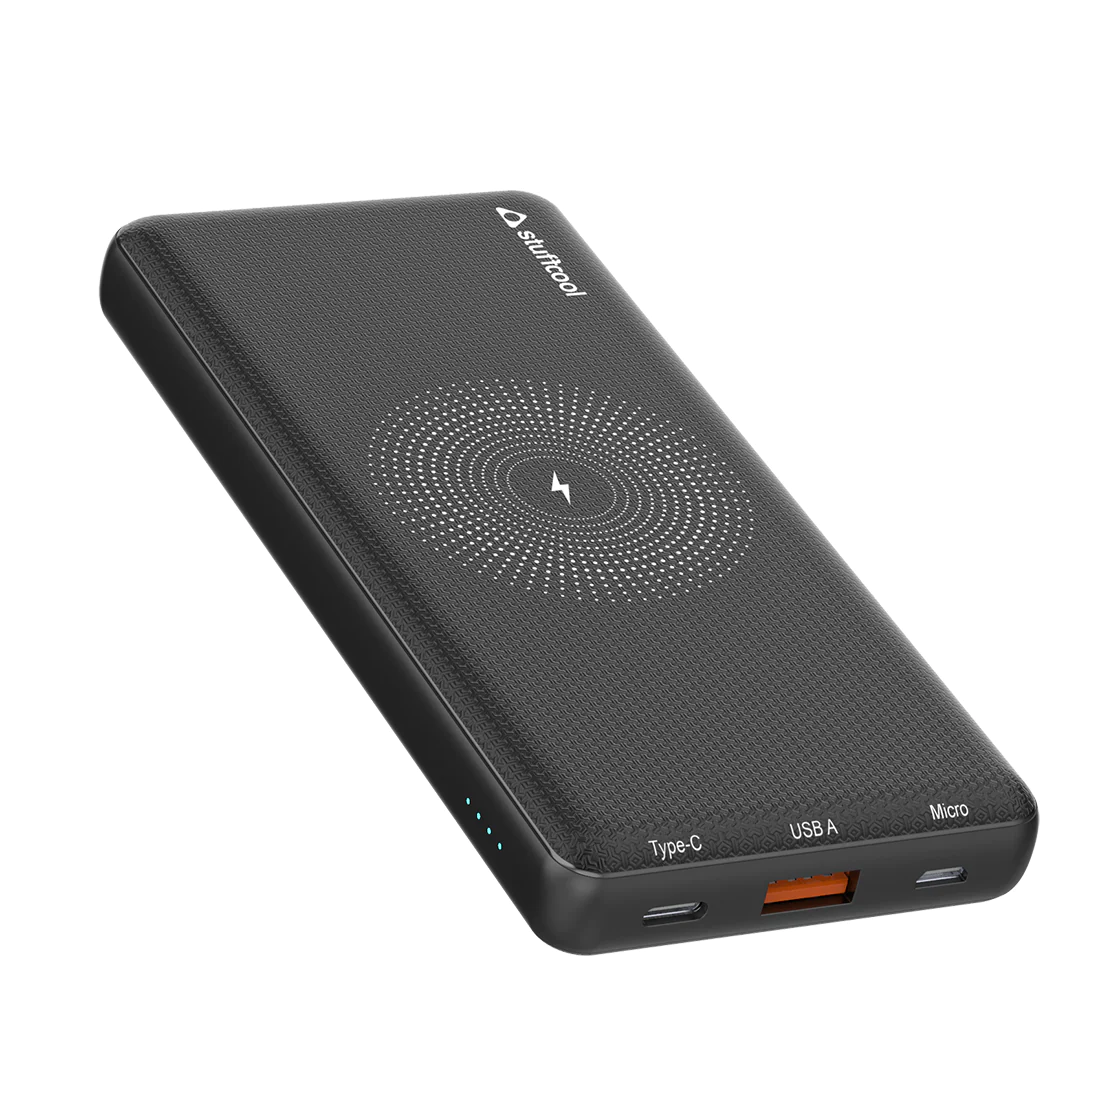 Wireless Powerbank 1 Shop Mobile Accessories Online in India